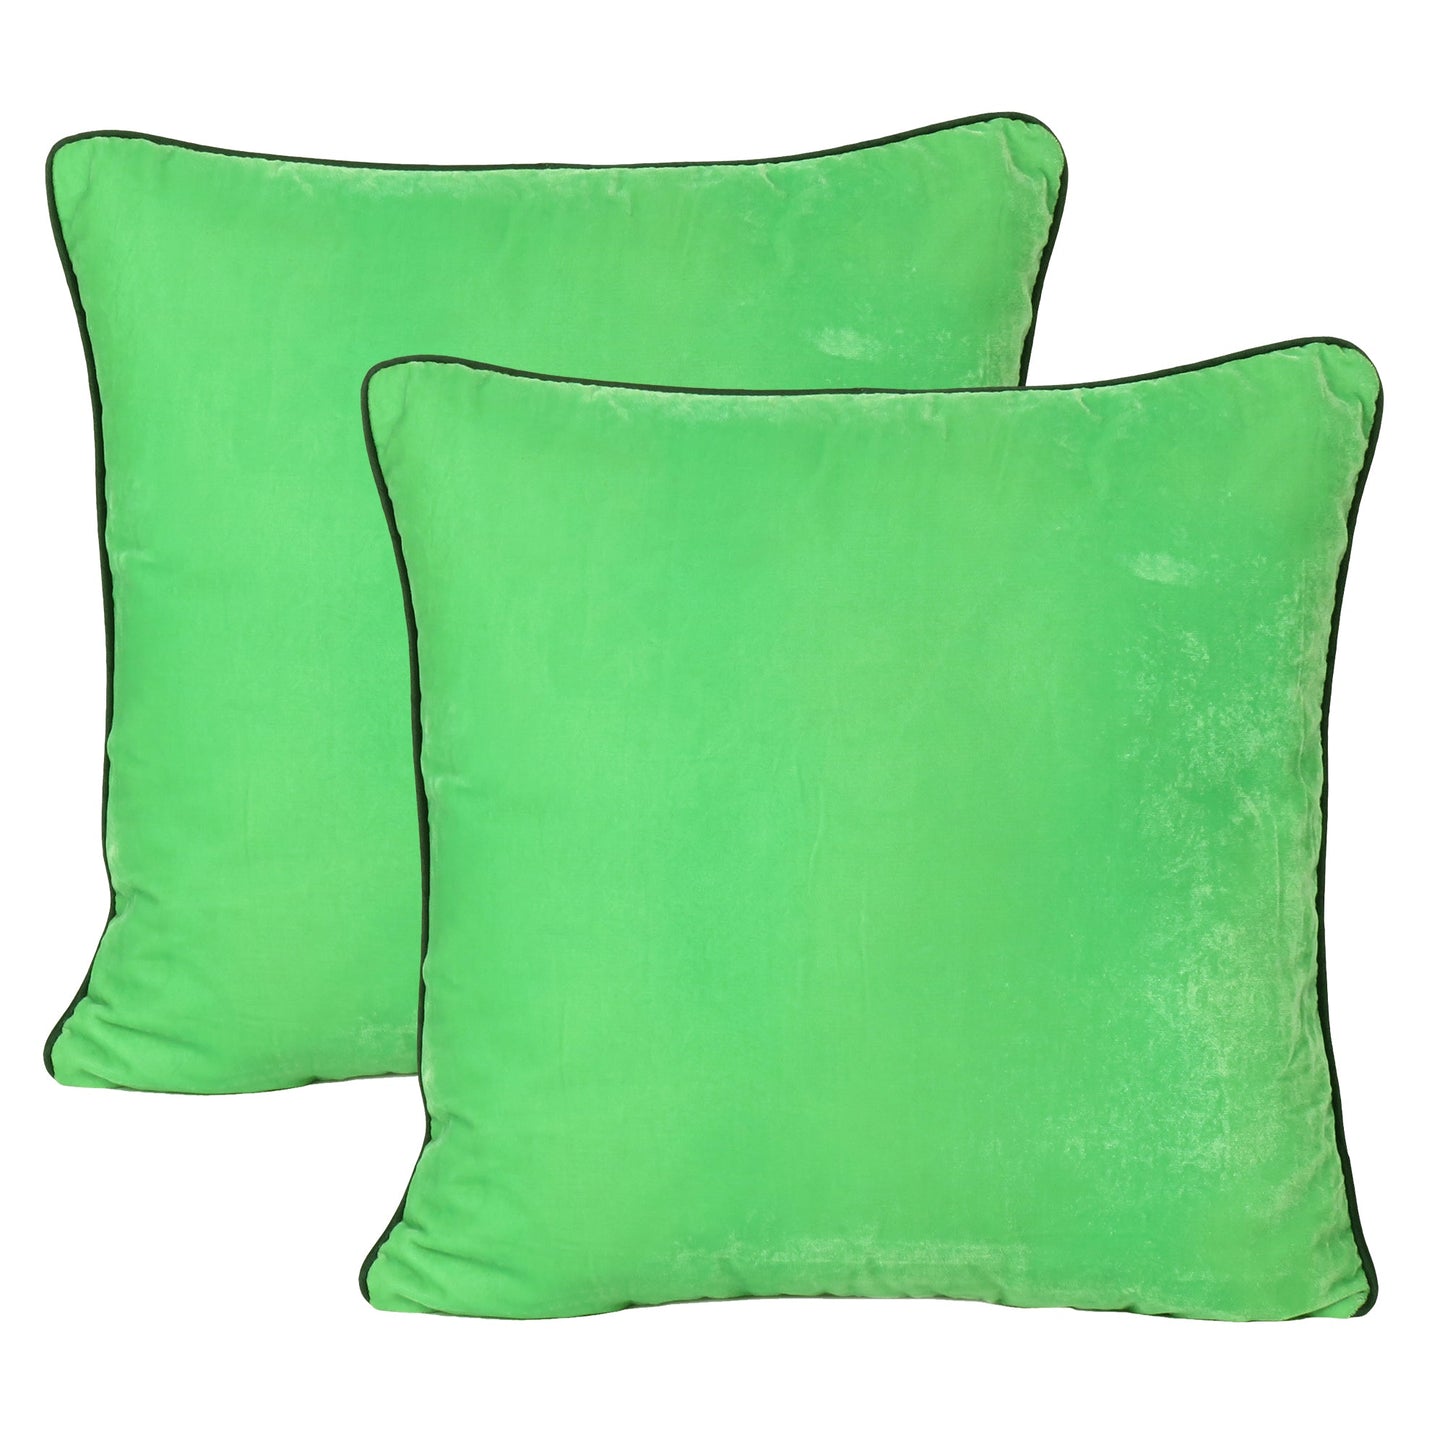 Green Velvet Cushion Cover with Dark Green Piping Edge in Set of 2